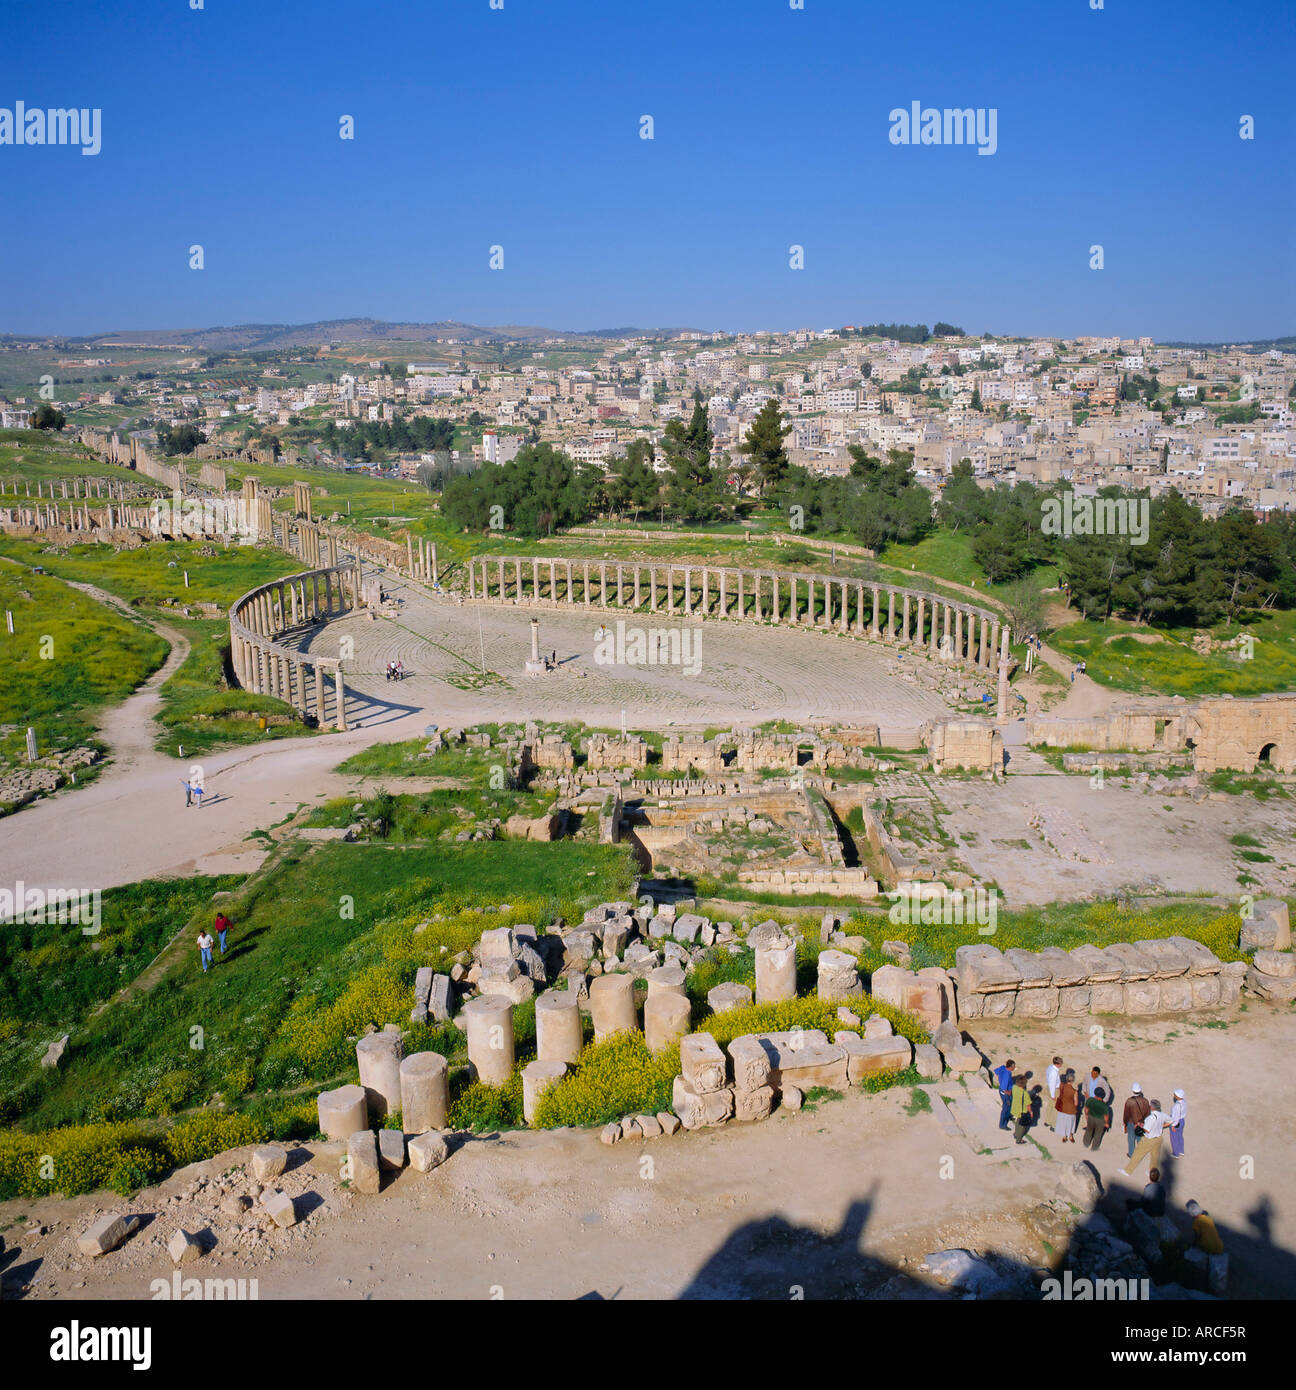 Oval Forum of the Roman Decapolis city, 1st century AD, delineated by an Ionic colonnade, Jerash, Jordan Stock Photo